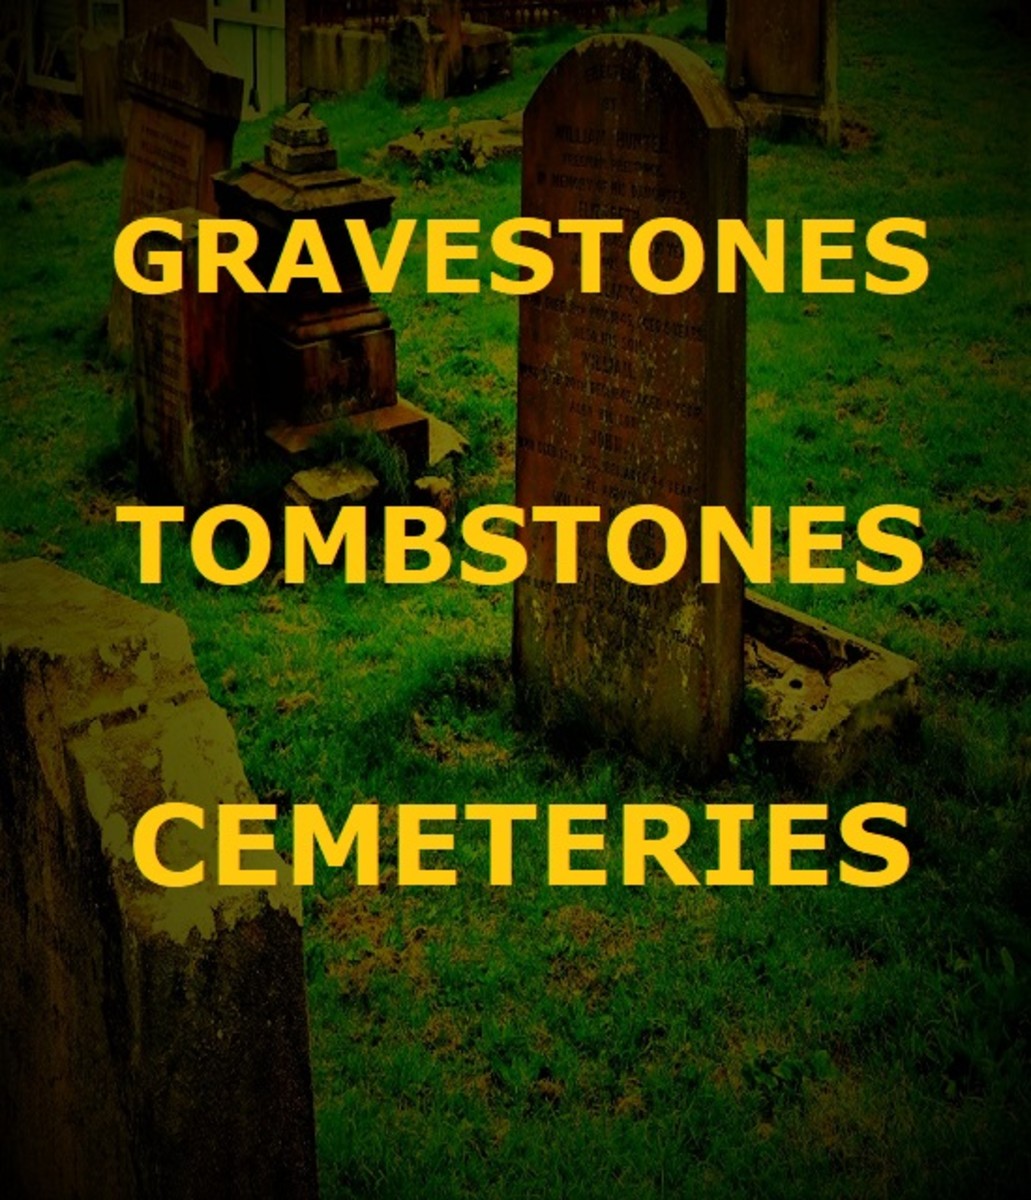 The History of English Cemeteries and Gravestones